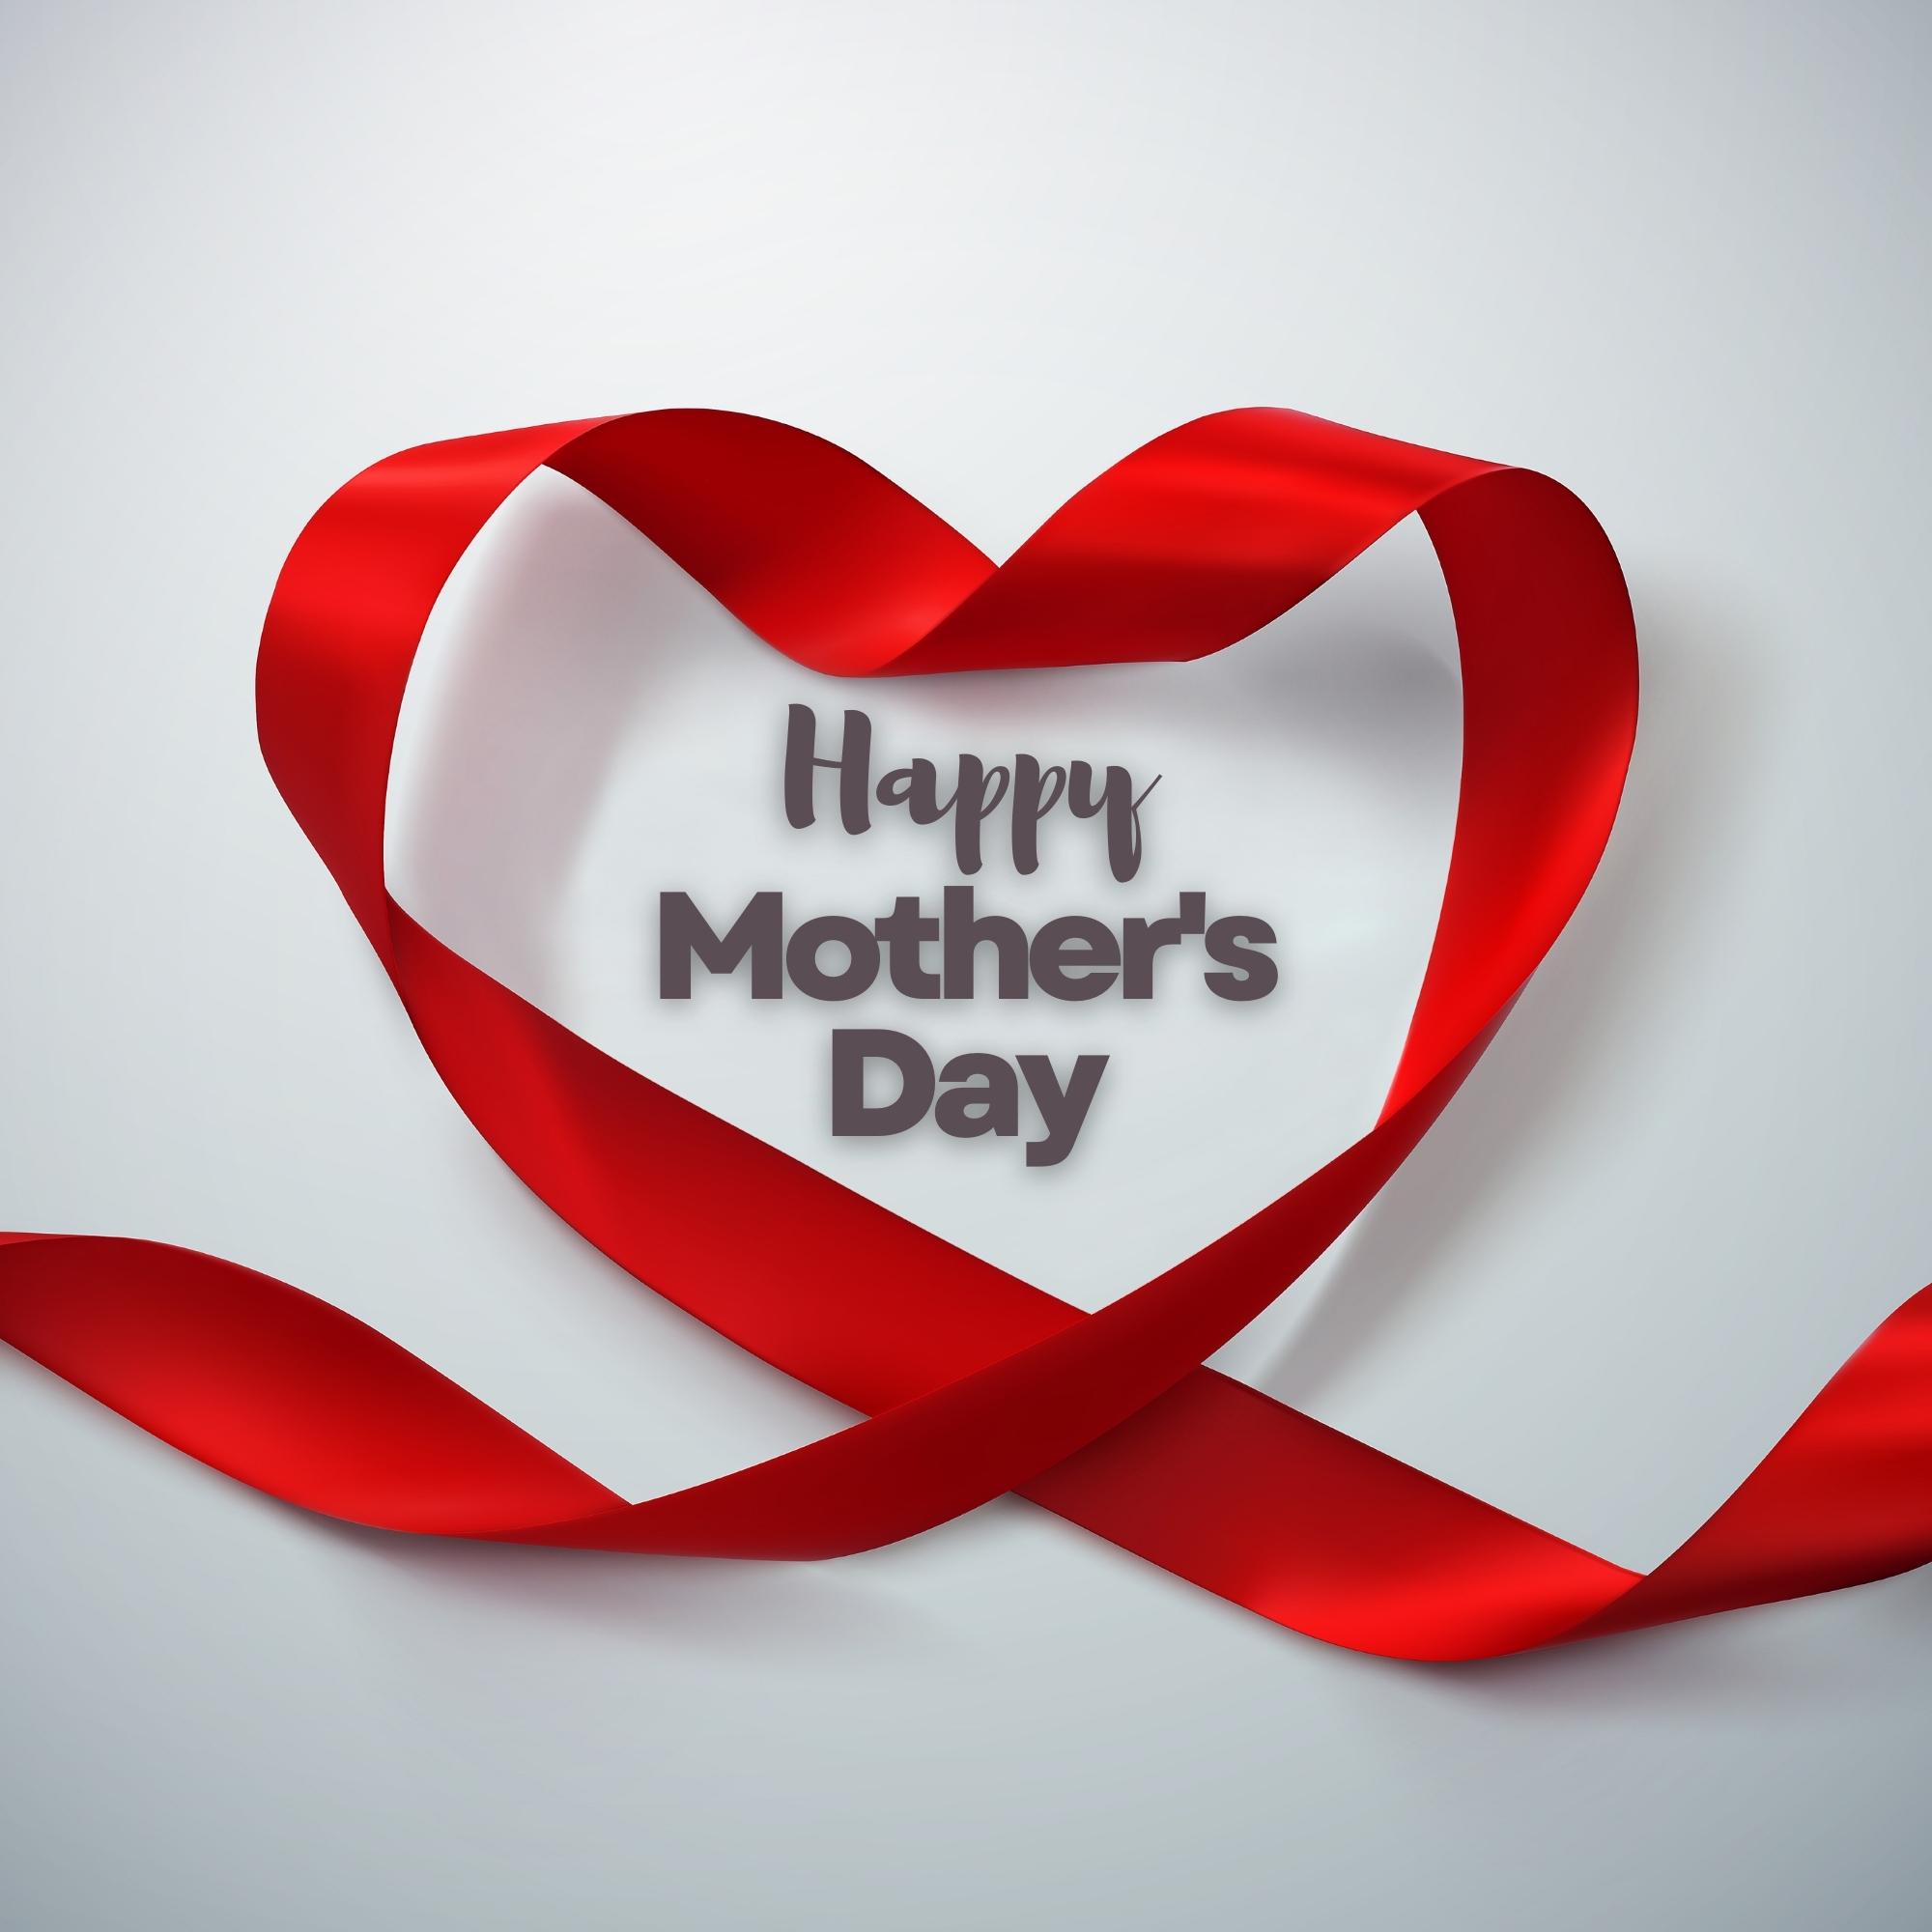 Happy Mothers Day Images | 1016 | Free Download [8k,4k,Hd]